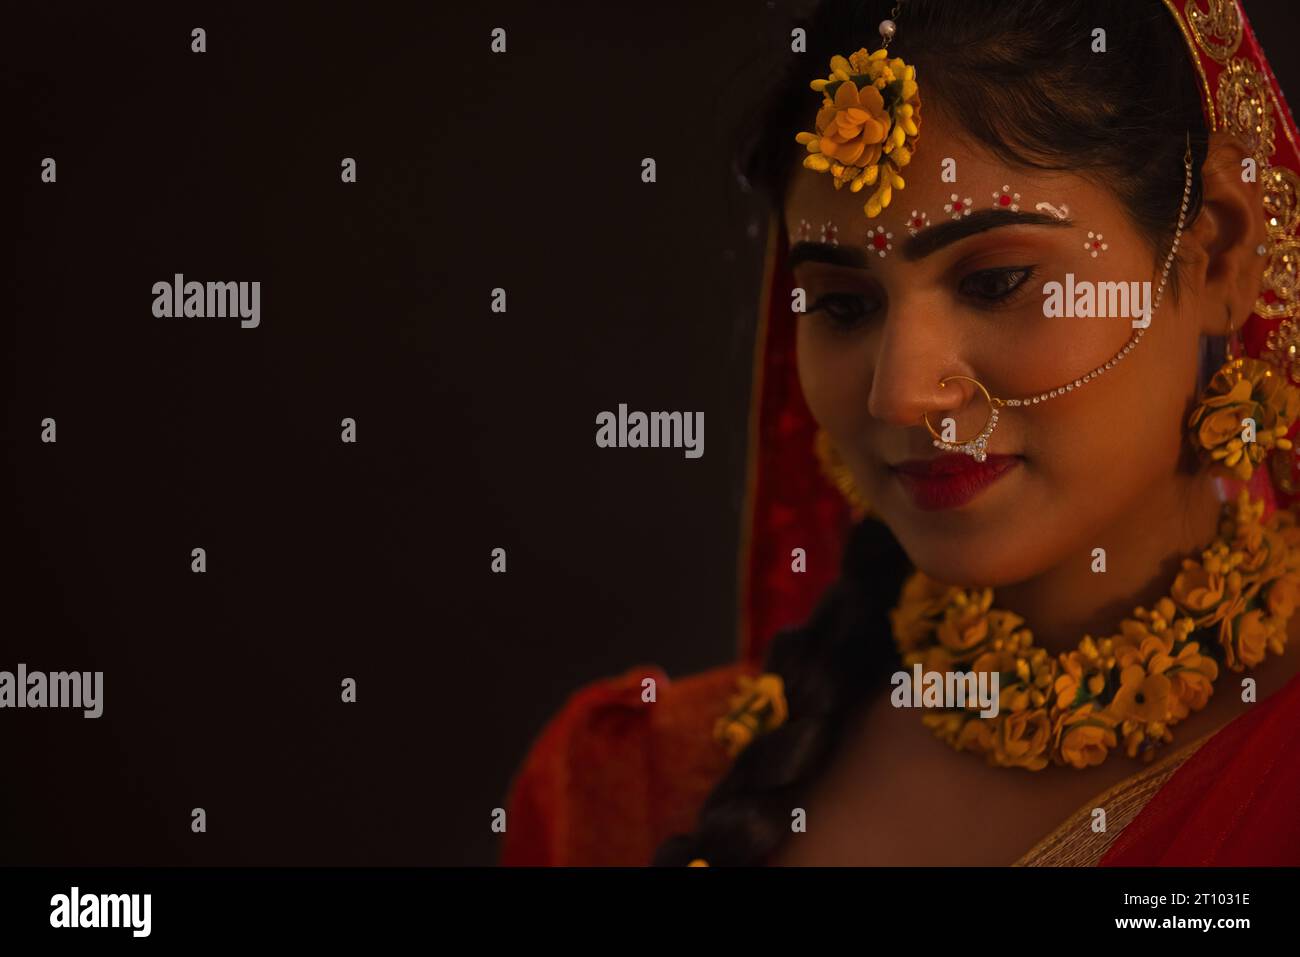 Close-up portrait of young woman dressed up as Lord Radha on the occasion of Janmashtami Stock Photo